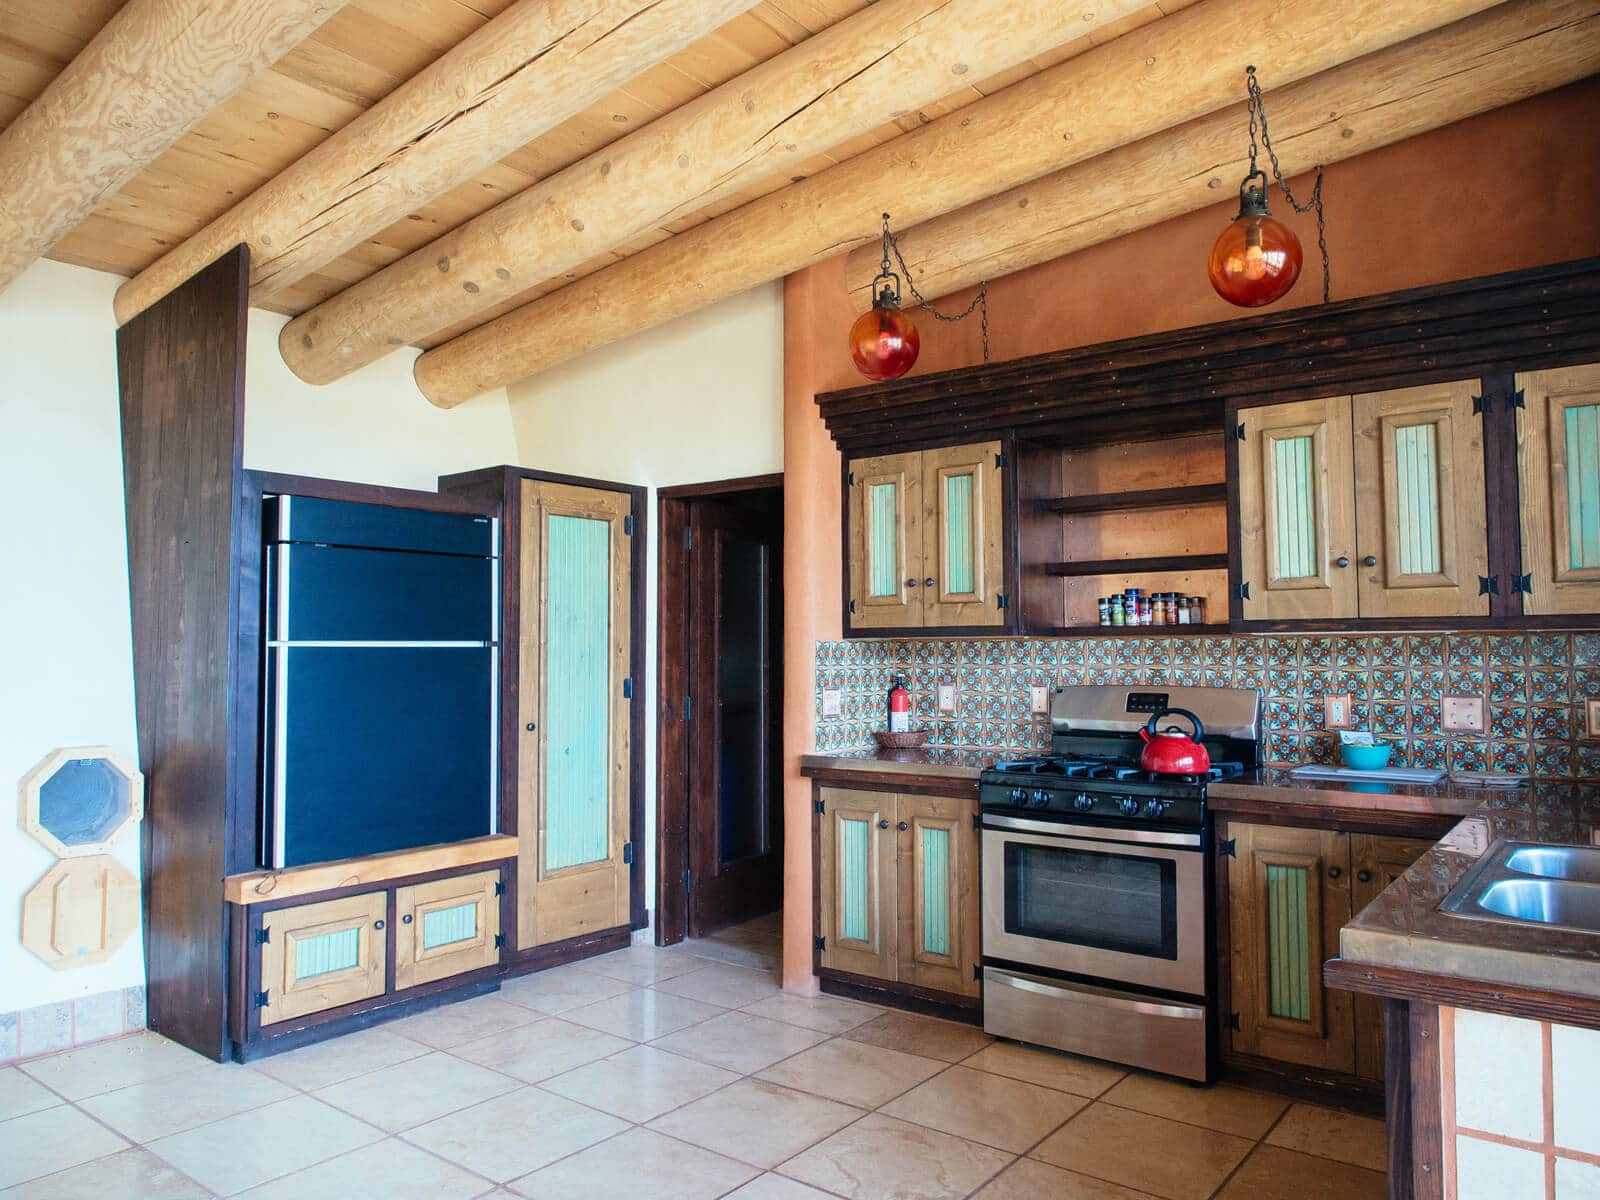 A handcrafted kitchen in an Earthship